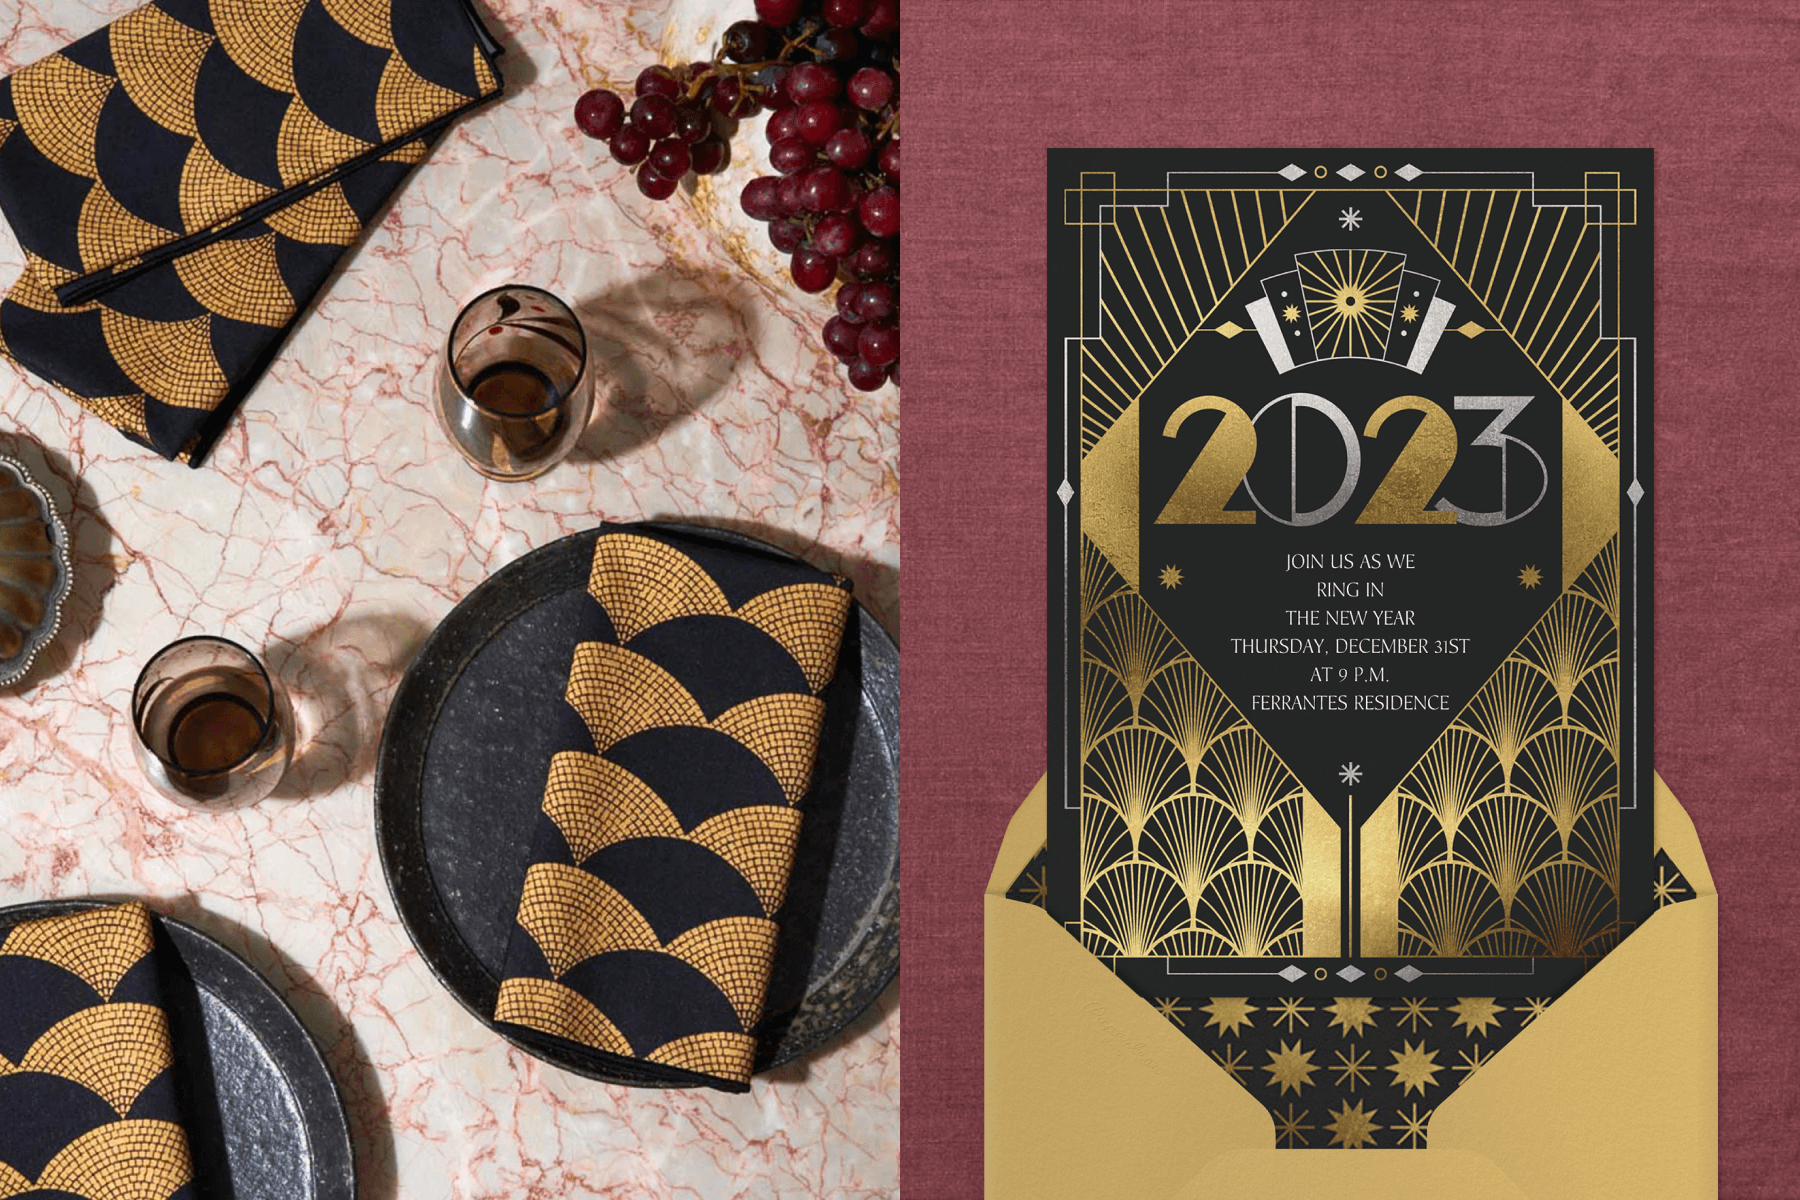 Left: An overhead photograph of black and gold napkins with a fan design surrounded by other party supplies like plates, wine glasses, and grapes; right: a black and gold art deco inspired New Year’s Eve invitation featuring a fan design and diamond-shaped text box.